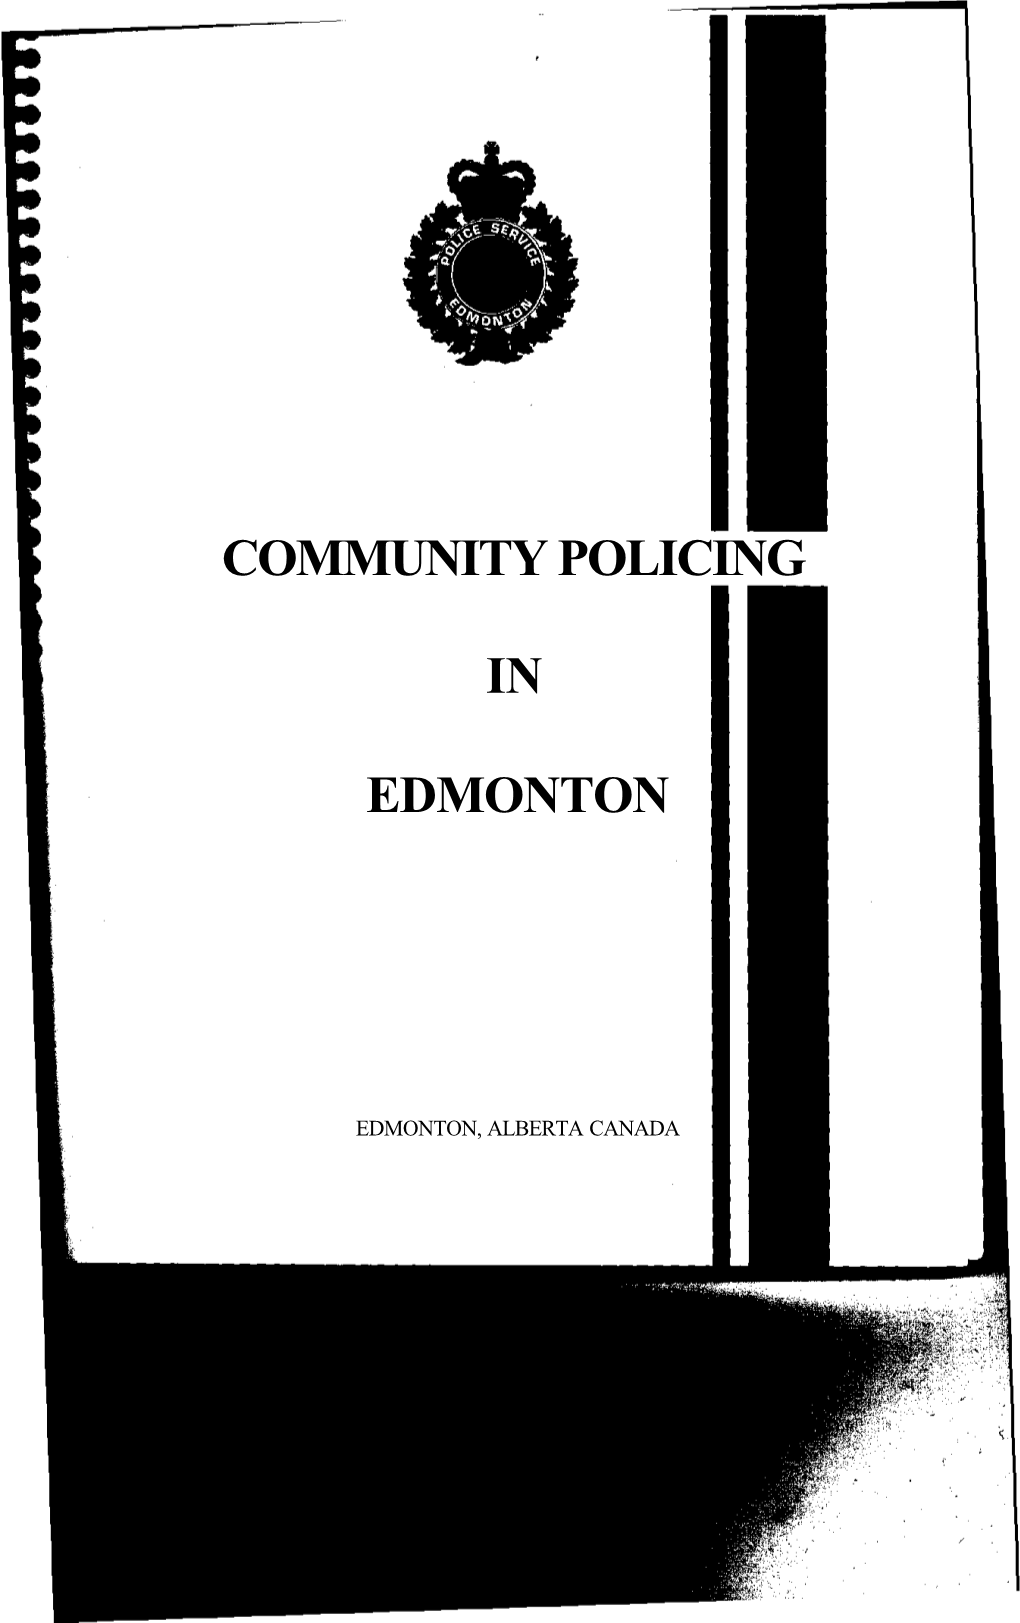 Community Policing in Edmonton: the Vision Continues